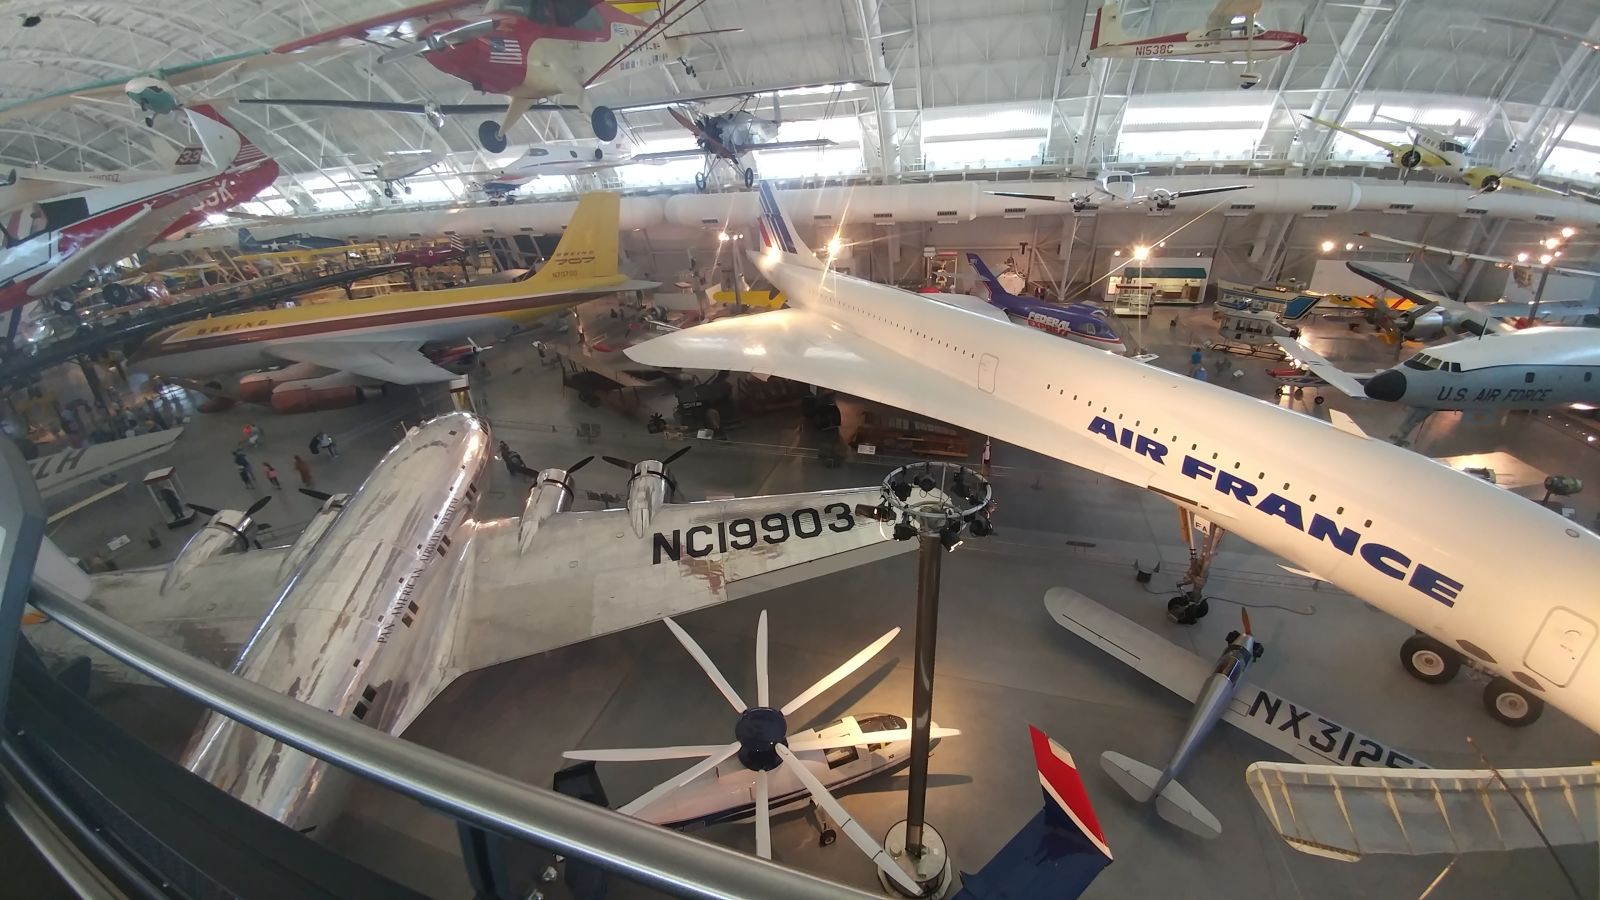 The Concord is so much larger than the 707!